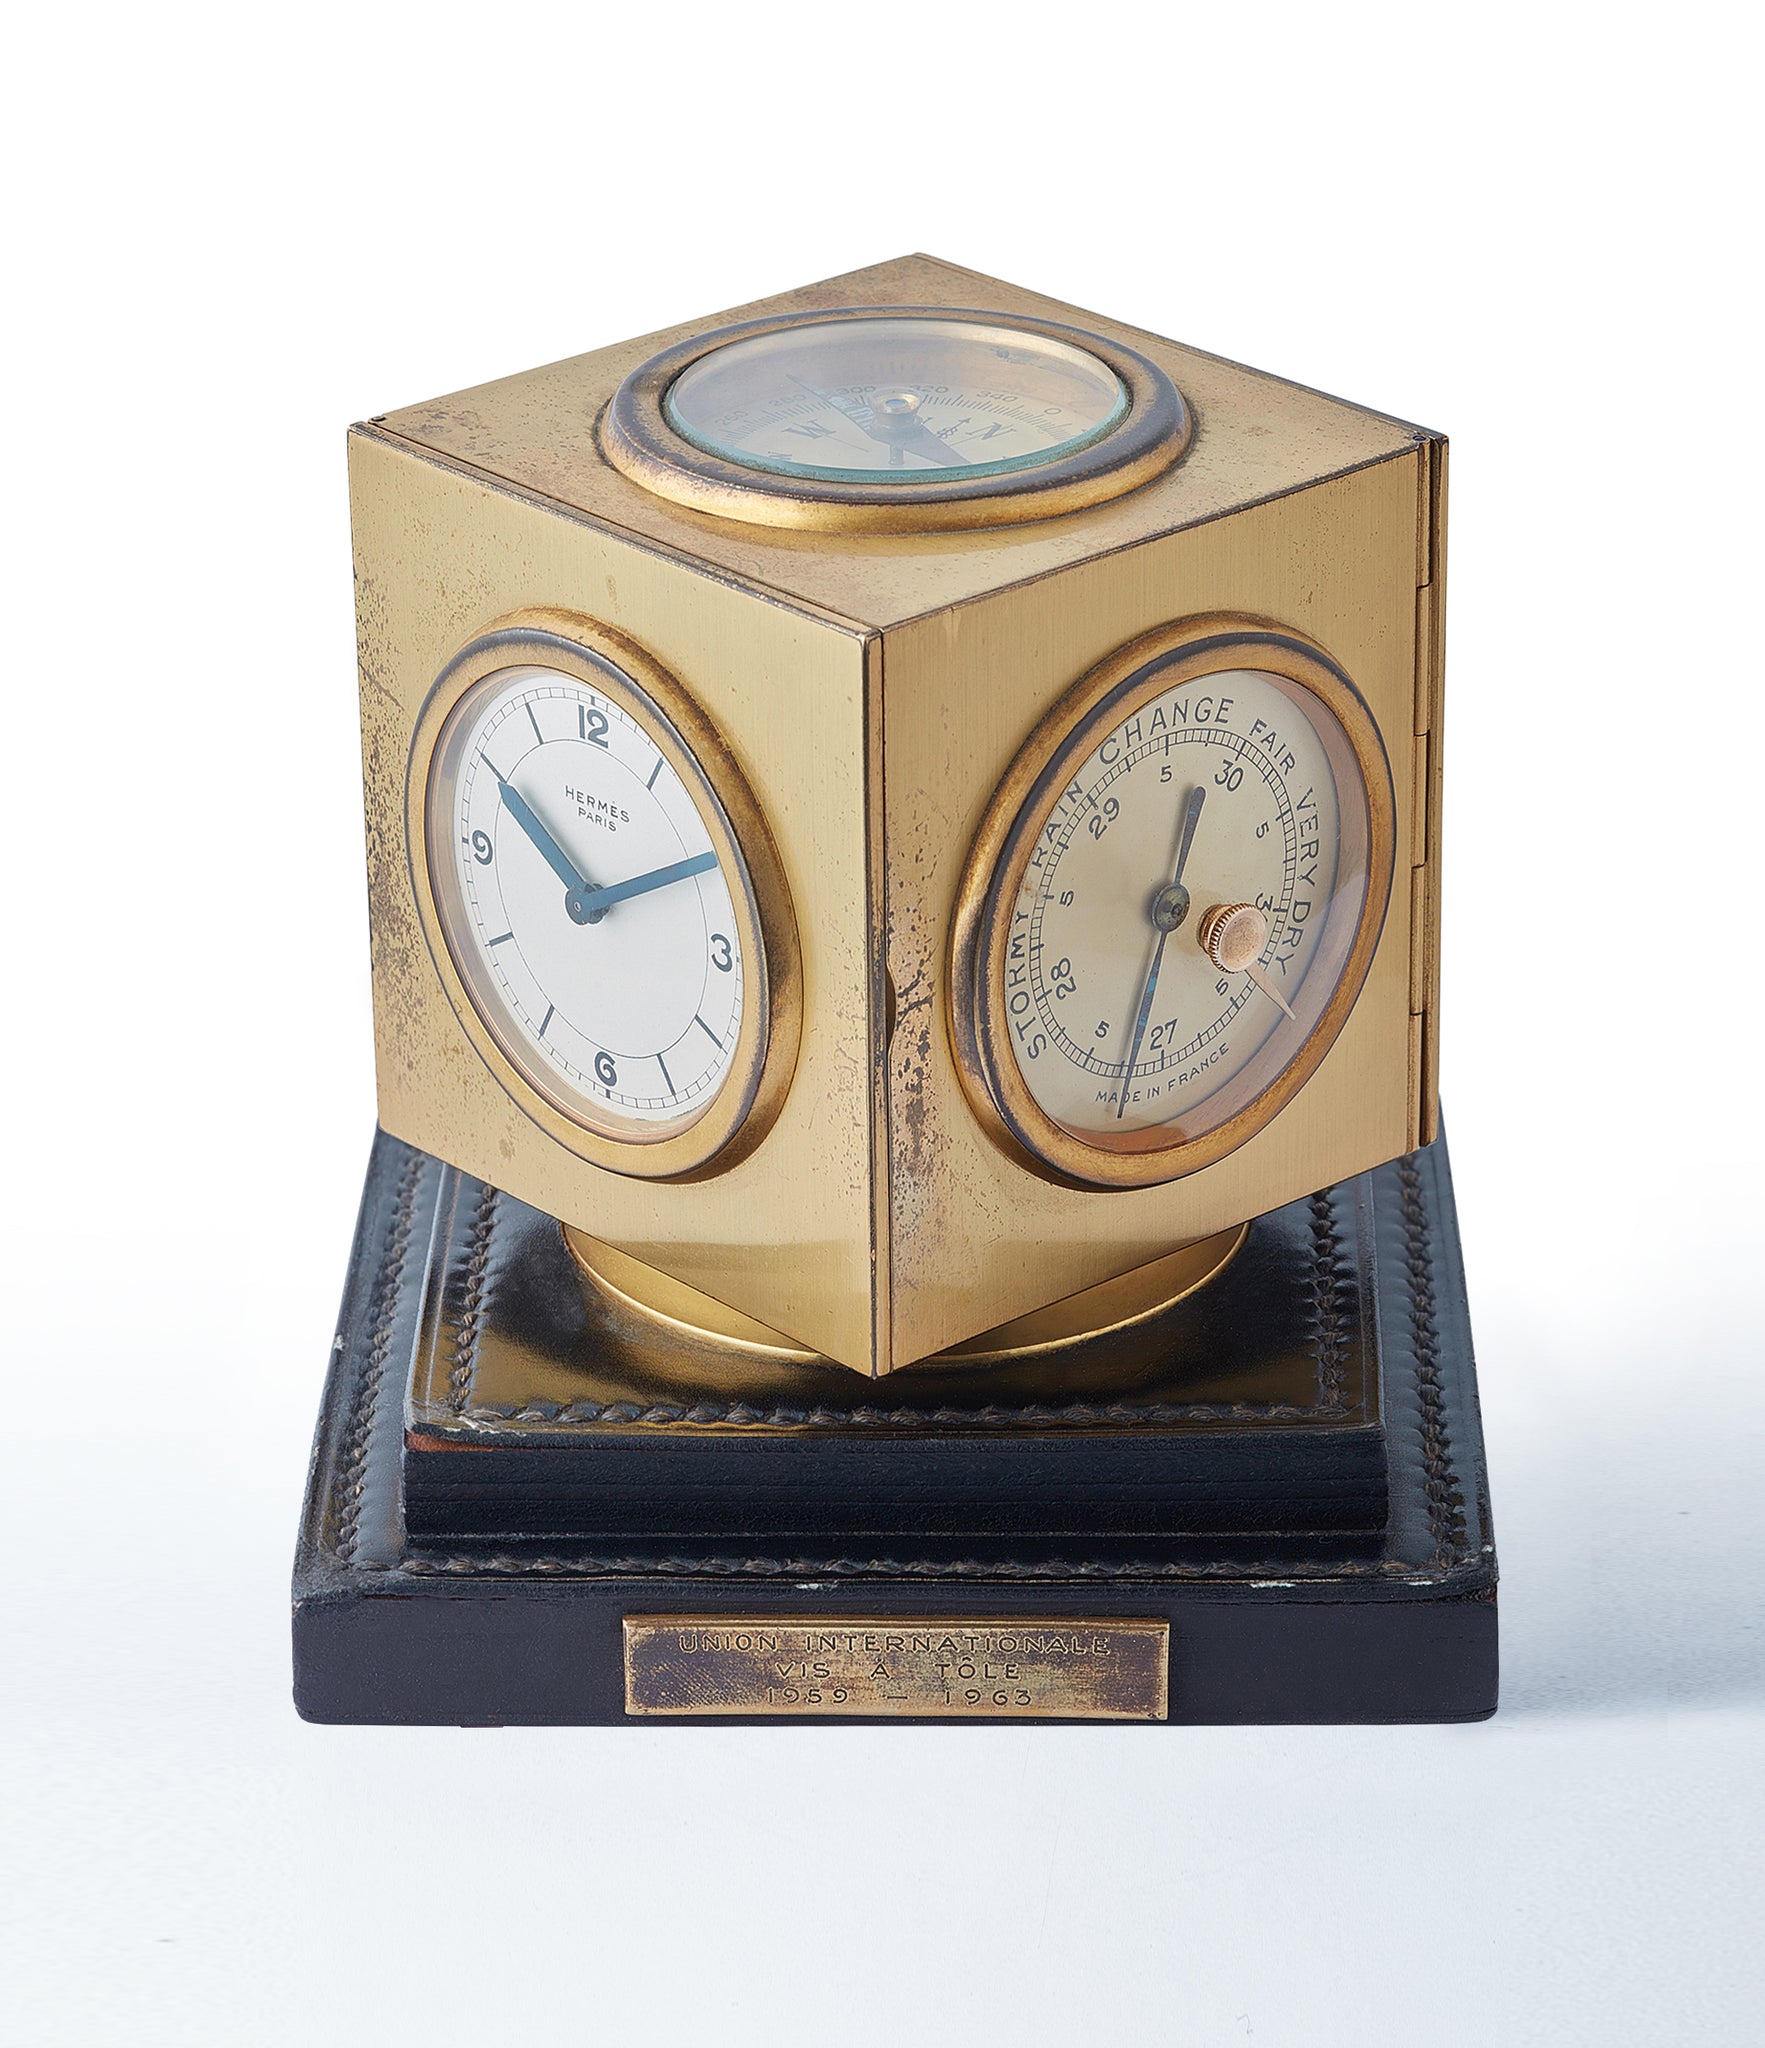 rare Hermes Compendium 8-day Art Deco brass calendar desk clock for sale online at A Collected Man for collectors of rare objects